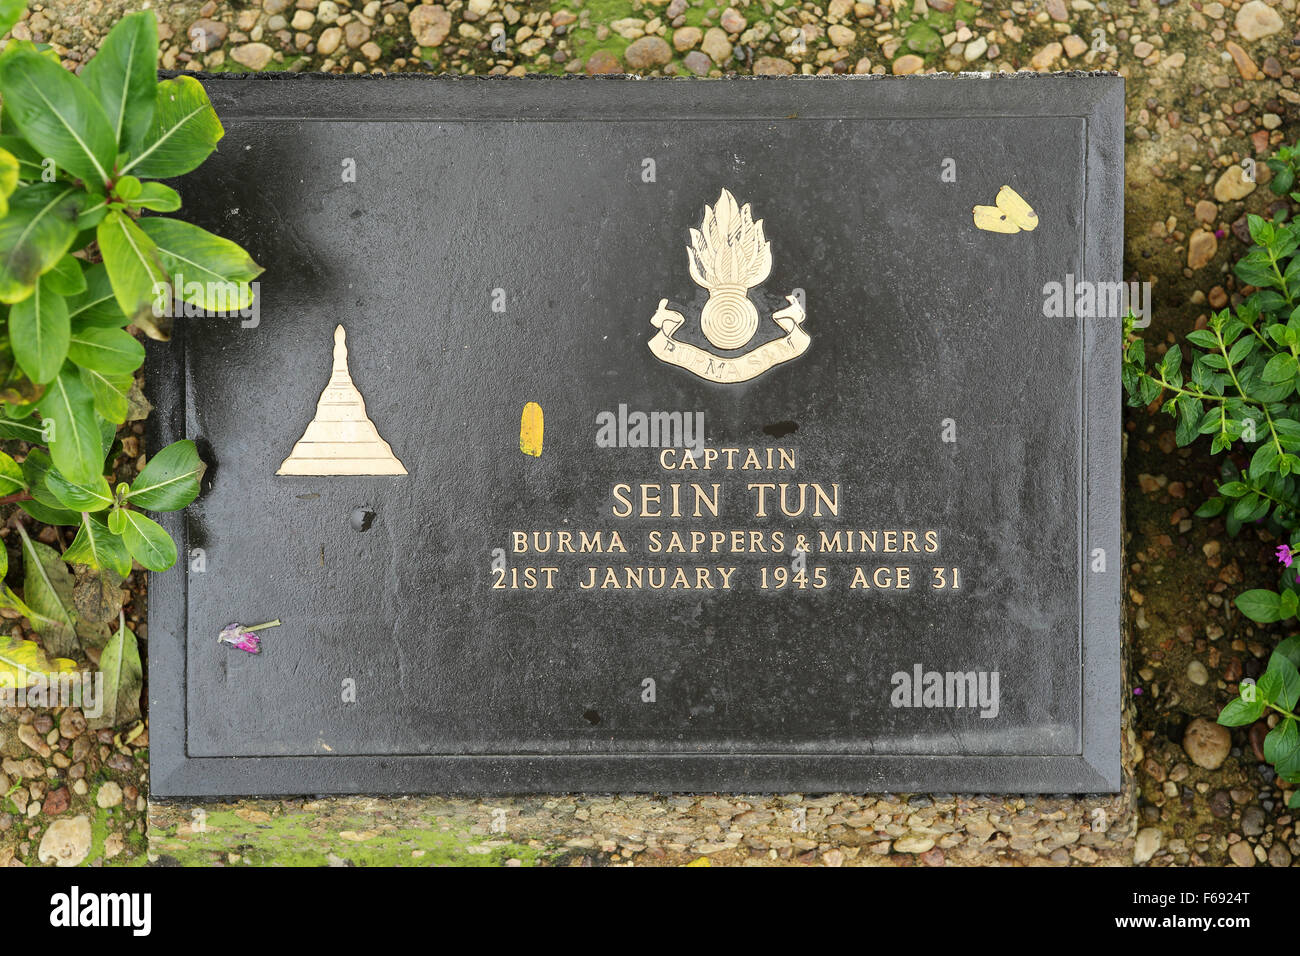 The grave of a captain from the Burma Sappers and Miners at Taukkyan War Cemetery near Yangon, Myanmar. Stock Photo